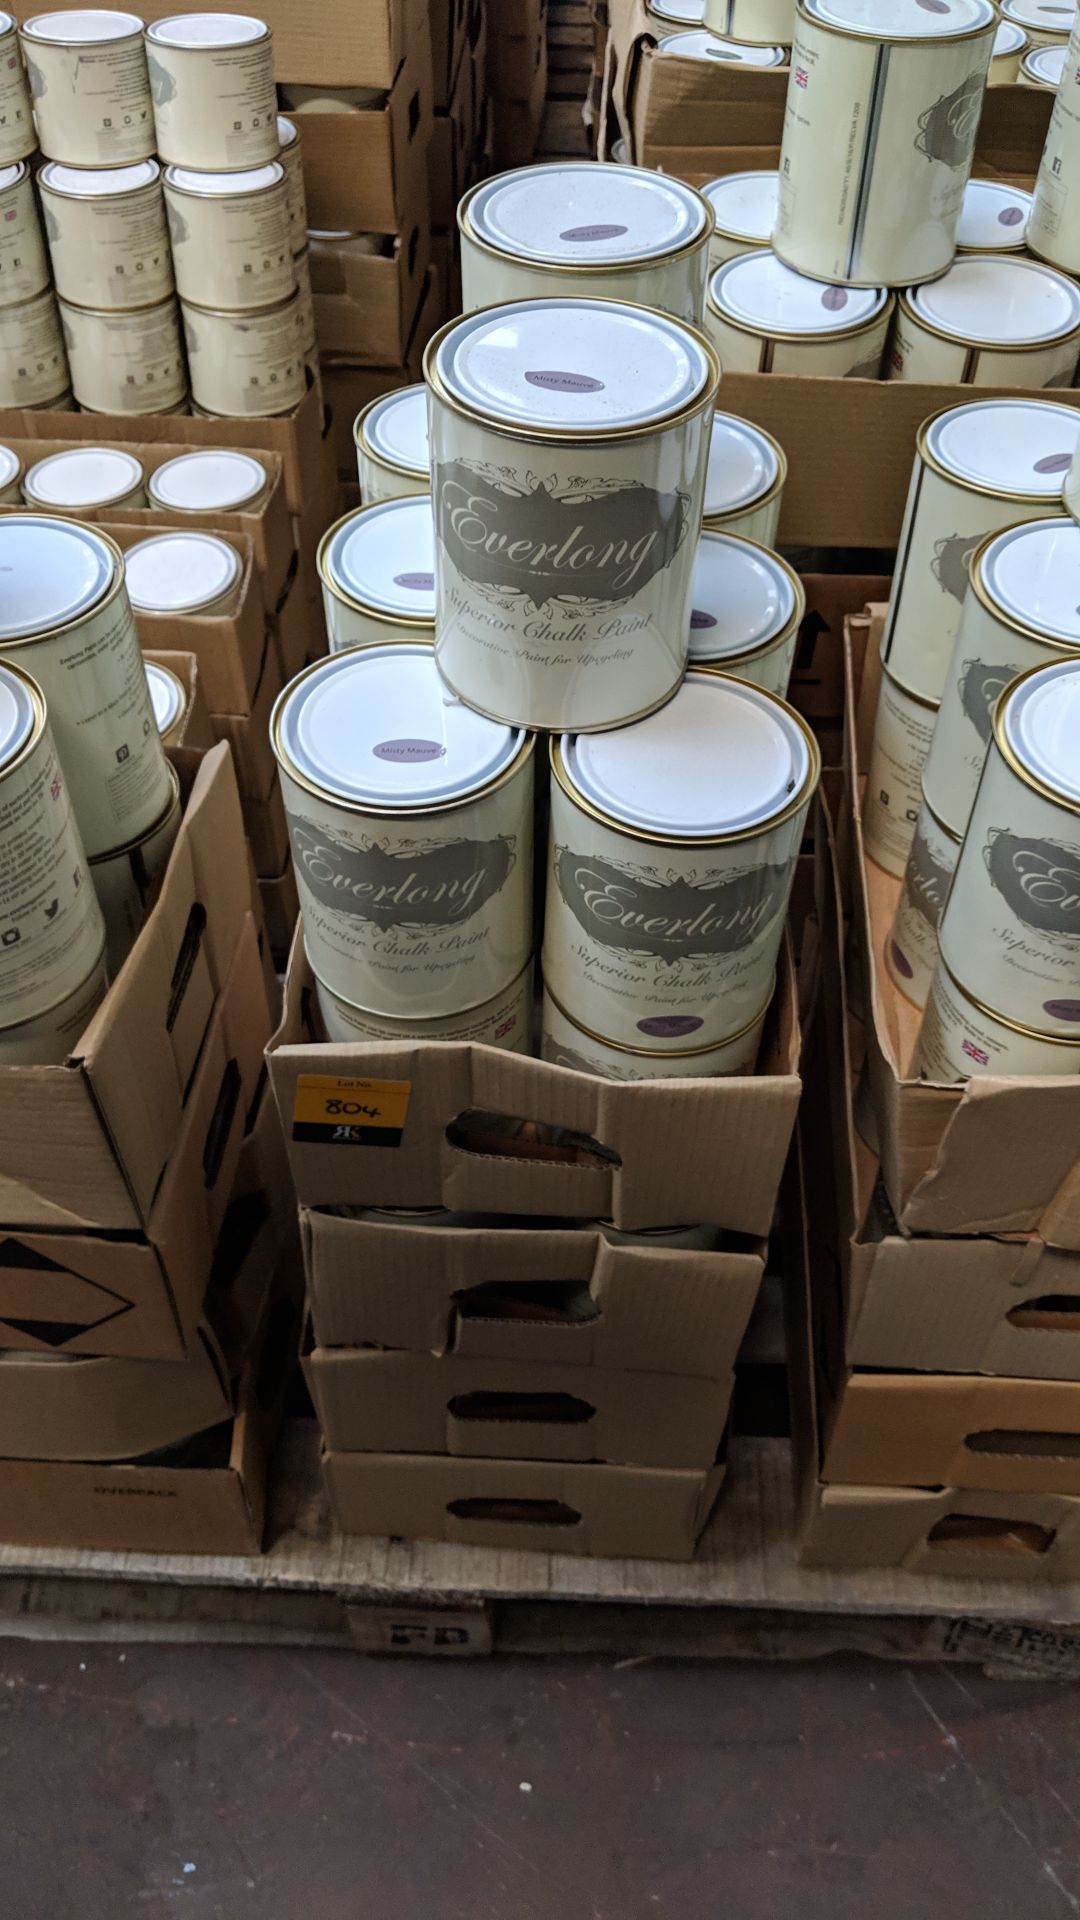 32 off 1 litre tins of Everlong branded superior chalk paint - colour Misty Mauve This lot is one of